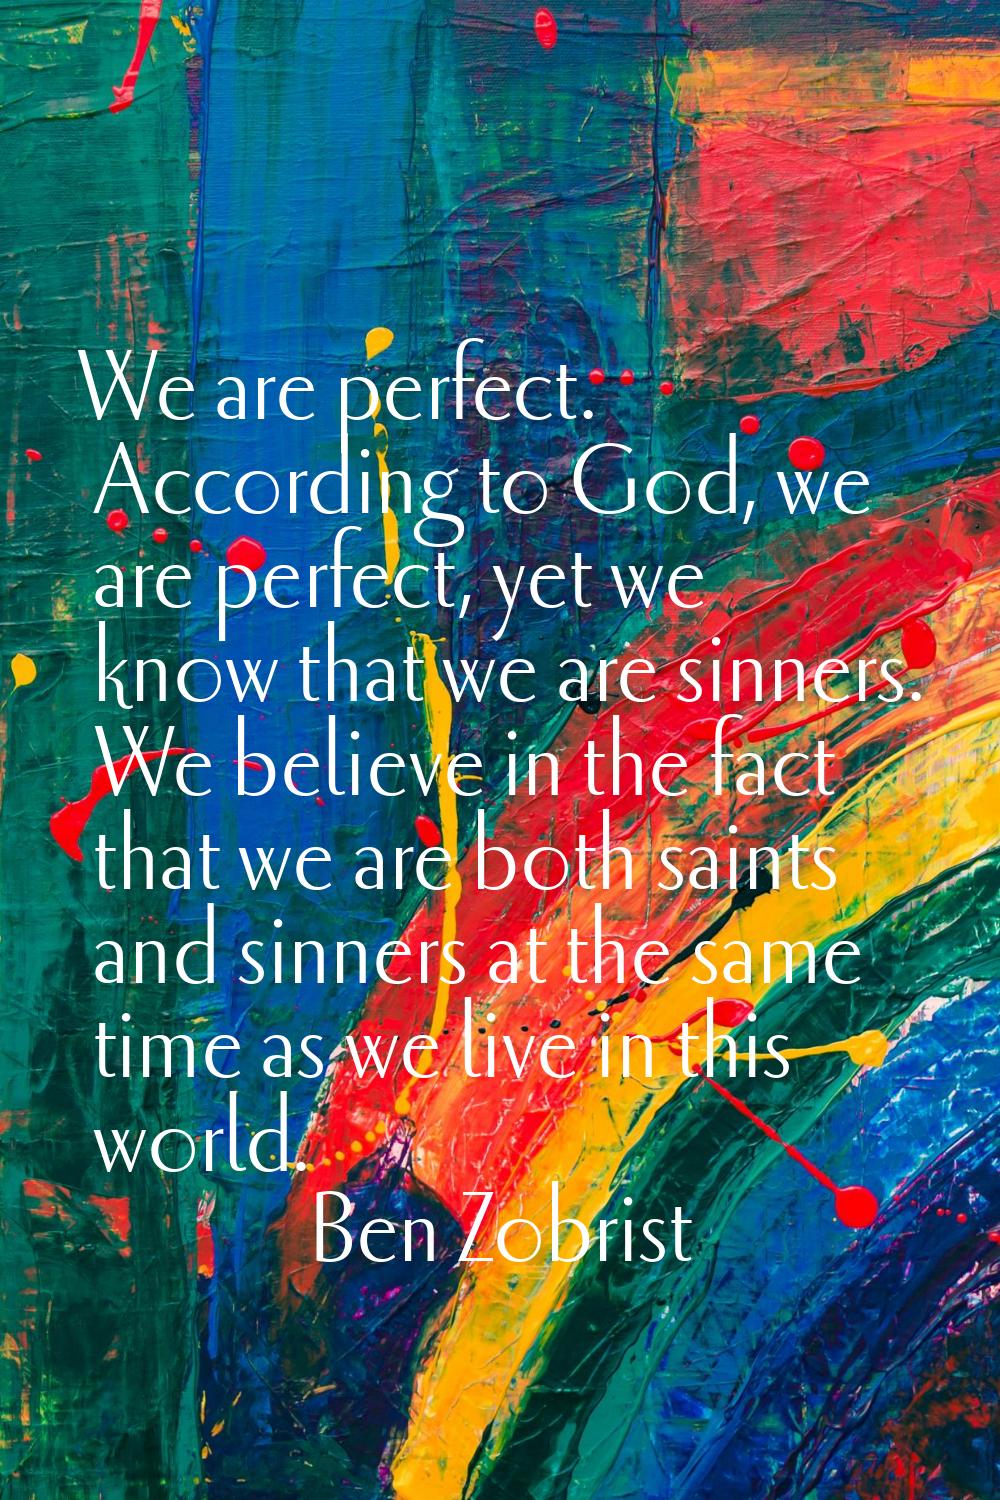 We are perfect. According to God, we are perfect, yet we know that we are sinners. We believe in th